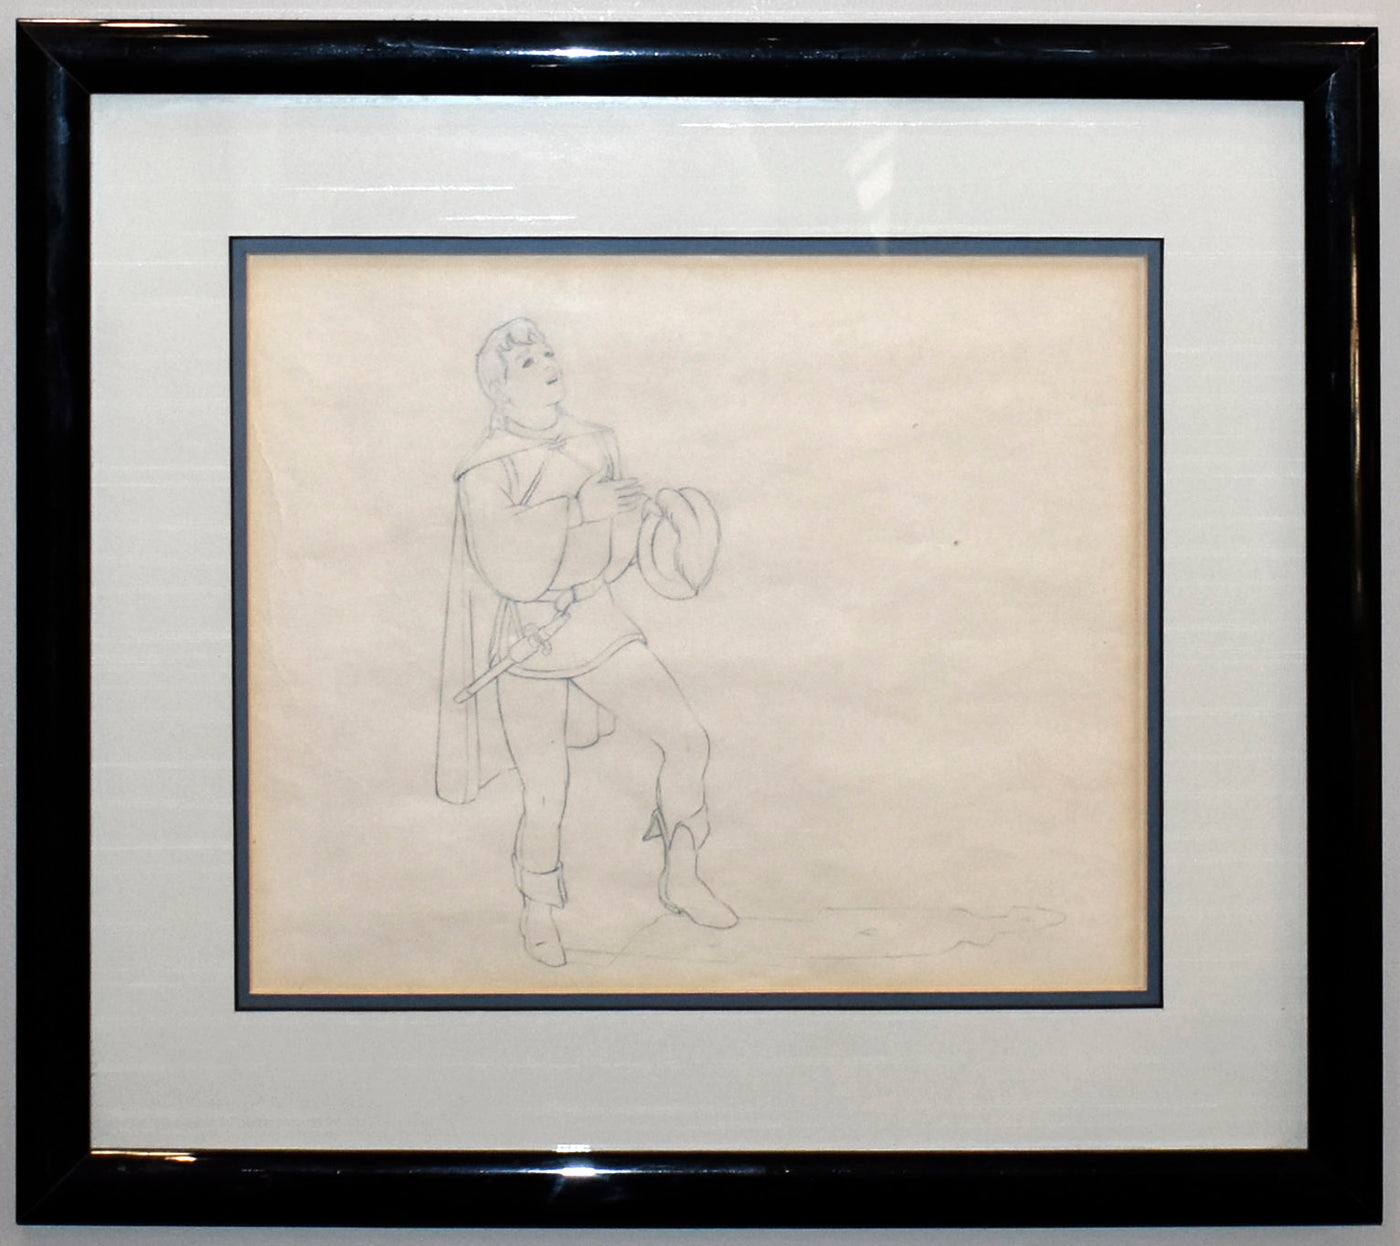 Original Walt Disney Production Drawing from Snow White and the Seven Dwarfs Featuring The Prince